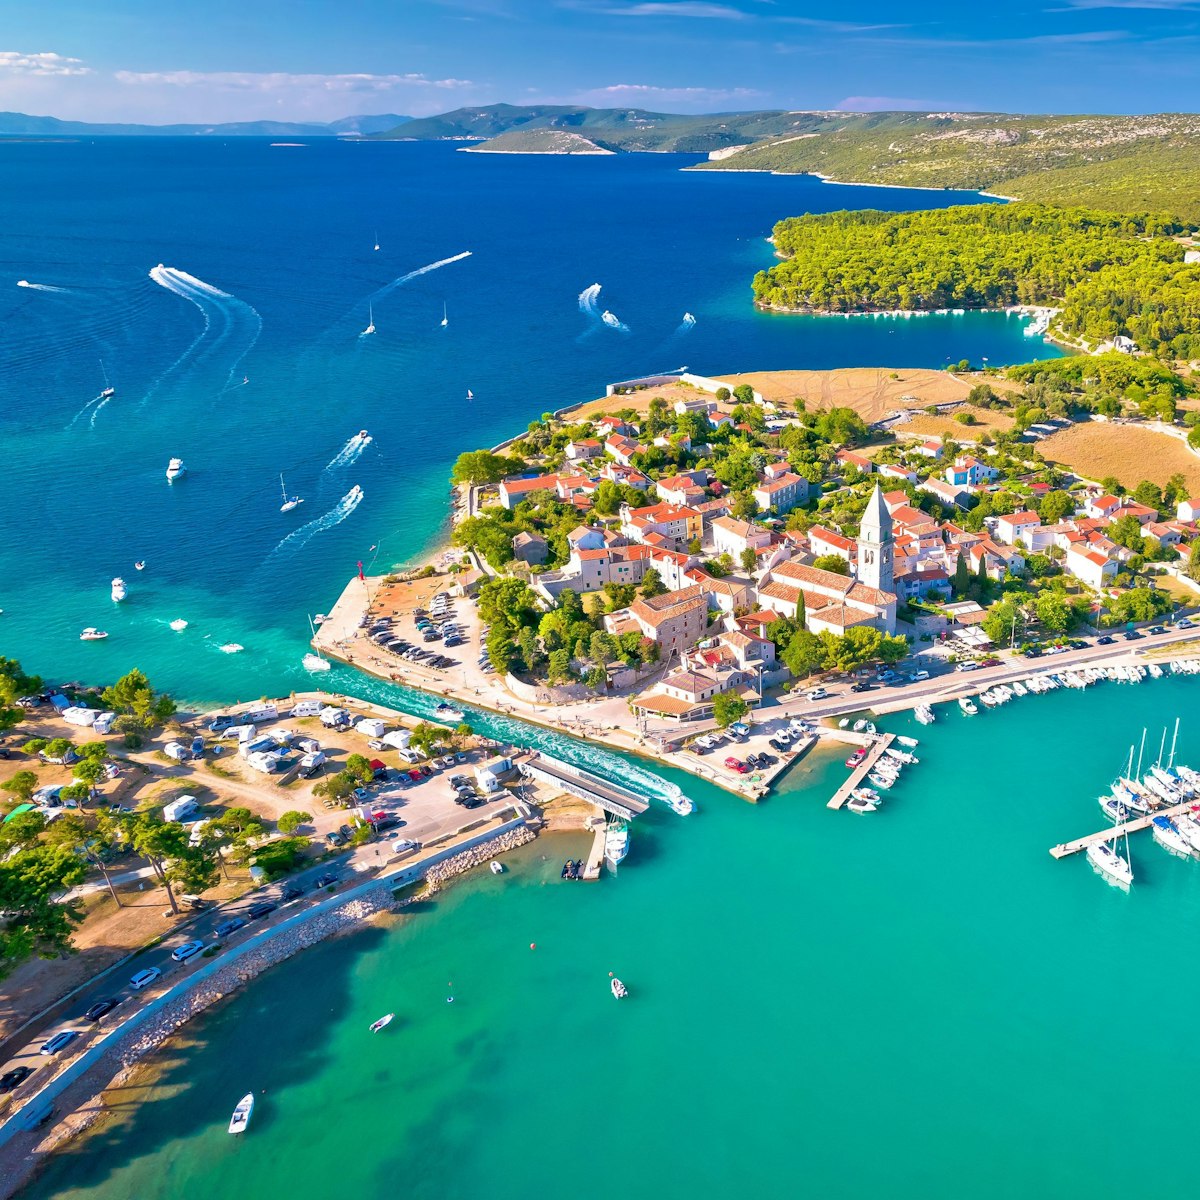 Here are some helpful tips, advice, and general overview for and of sailing in Croatia for first-timers.